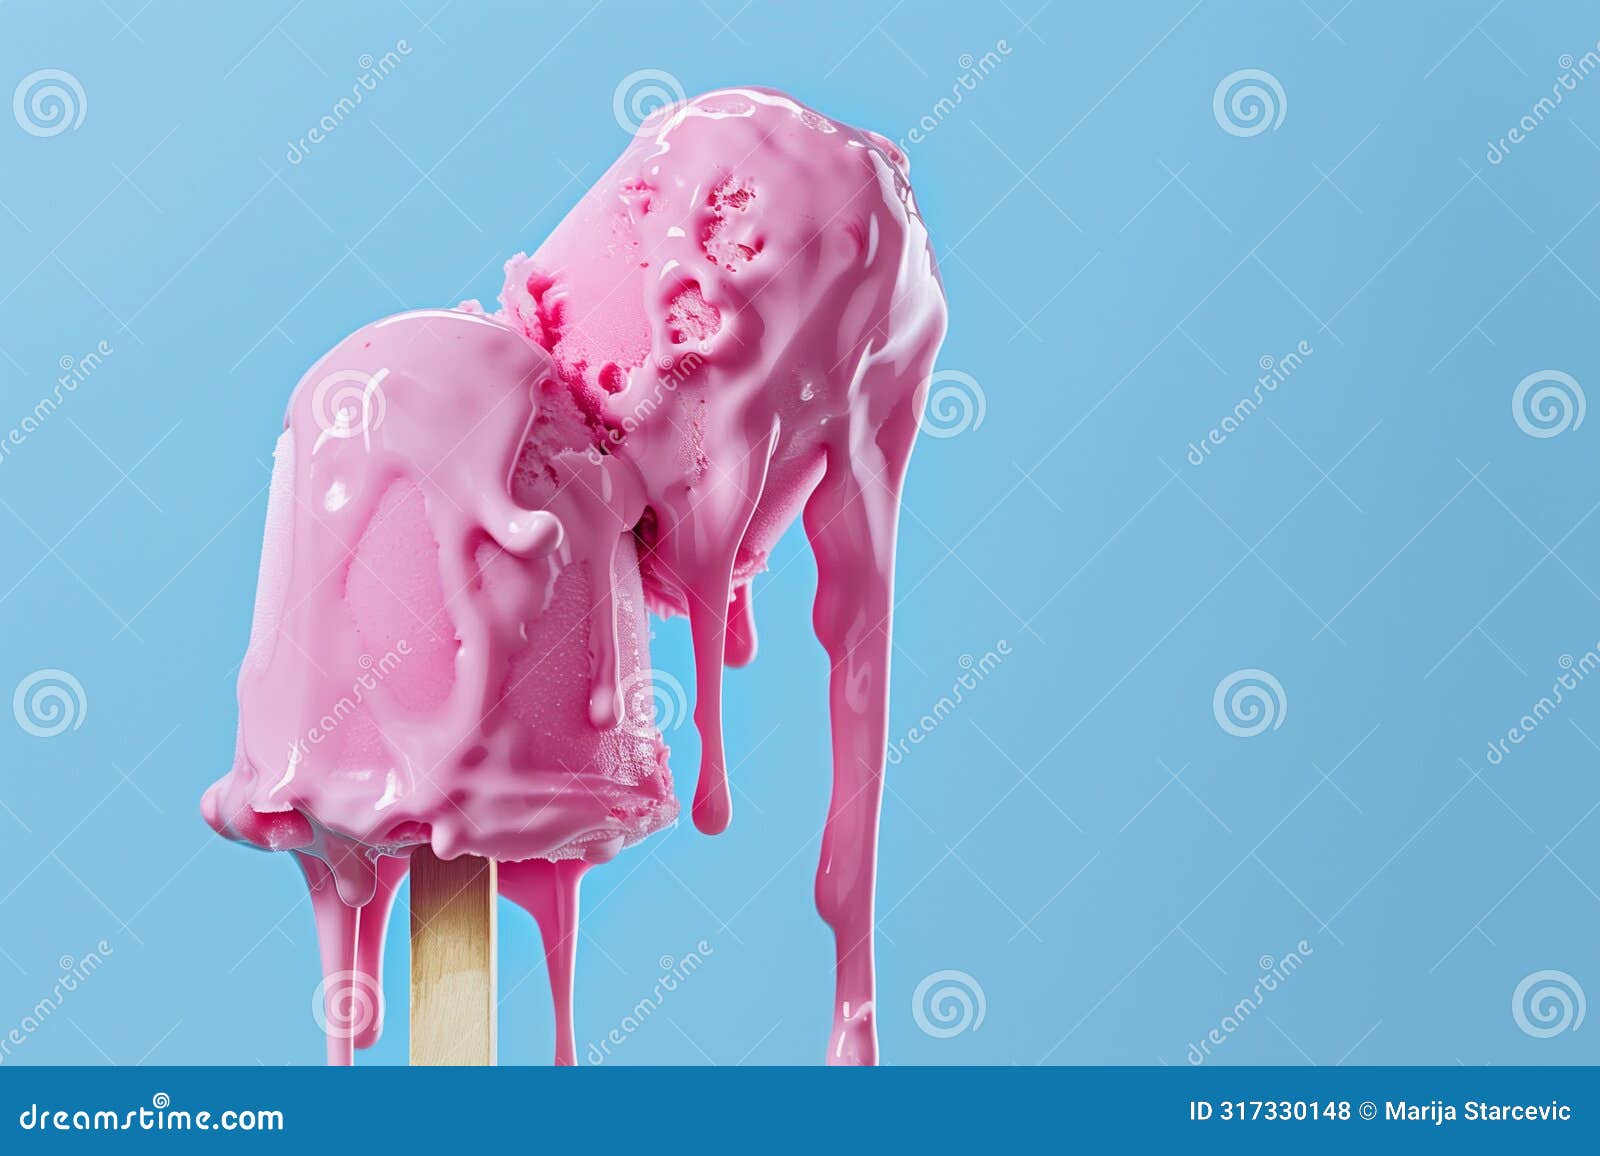 wierd home made strawbery ice cream on the stick  on a blue background